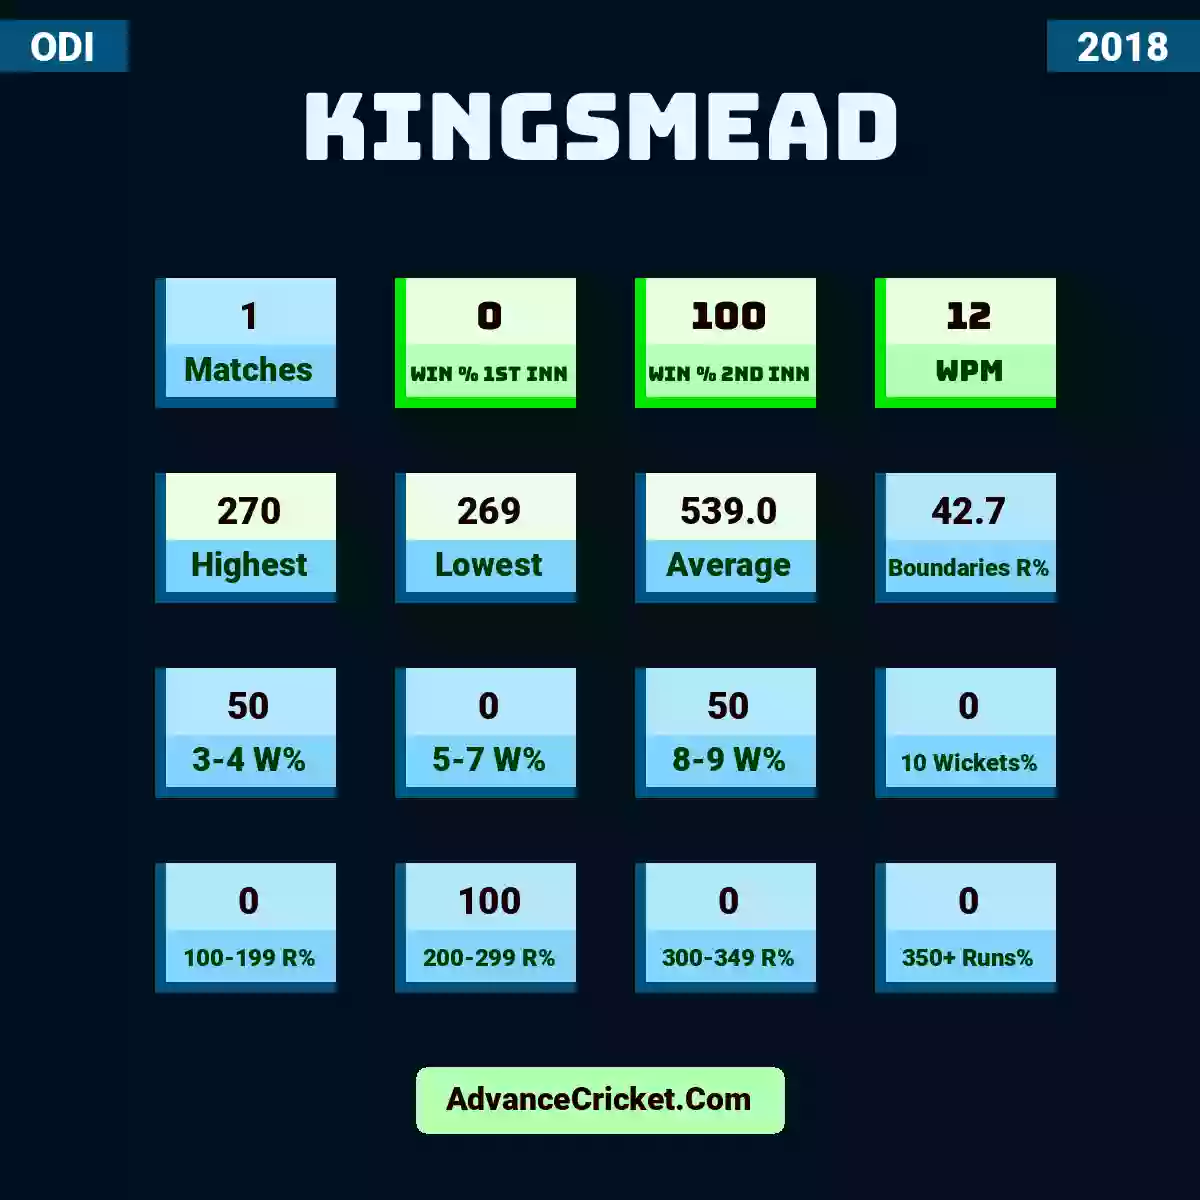 Image showing Kingsmead with Matches: 1, Win % 1st Inn: 0, Win % 2nd Inn: 100, WPM: 12, Highest: 270, Lowest: 269, Average: 539.0, Boundaries R%: 42.7, 3-4 W%: 50, 5-7 W%: 0, 8-9 W%: 50, 10 Wickets%: 0, 100-199 R%: 0, 200-299 R%: 100, 300-349 R%: 0, 350+ Runs%: 0.